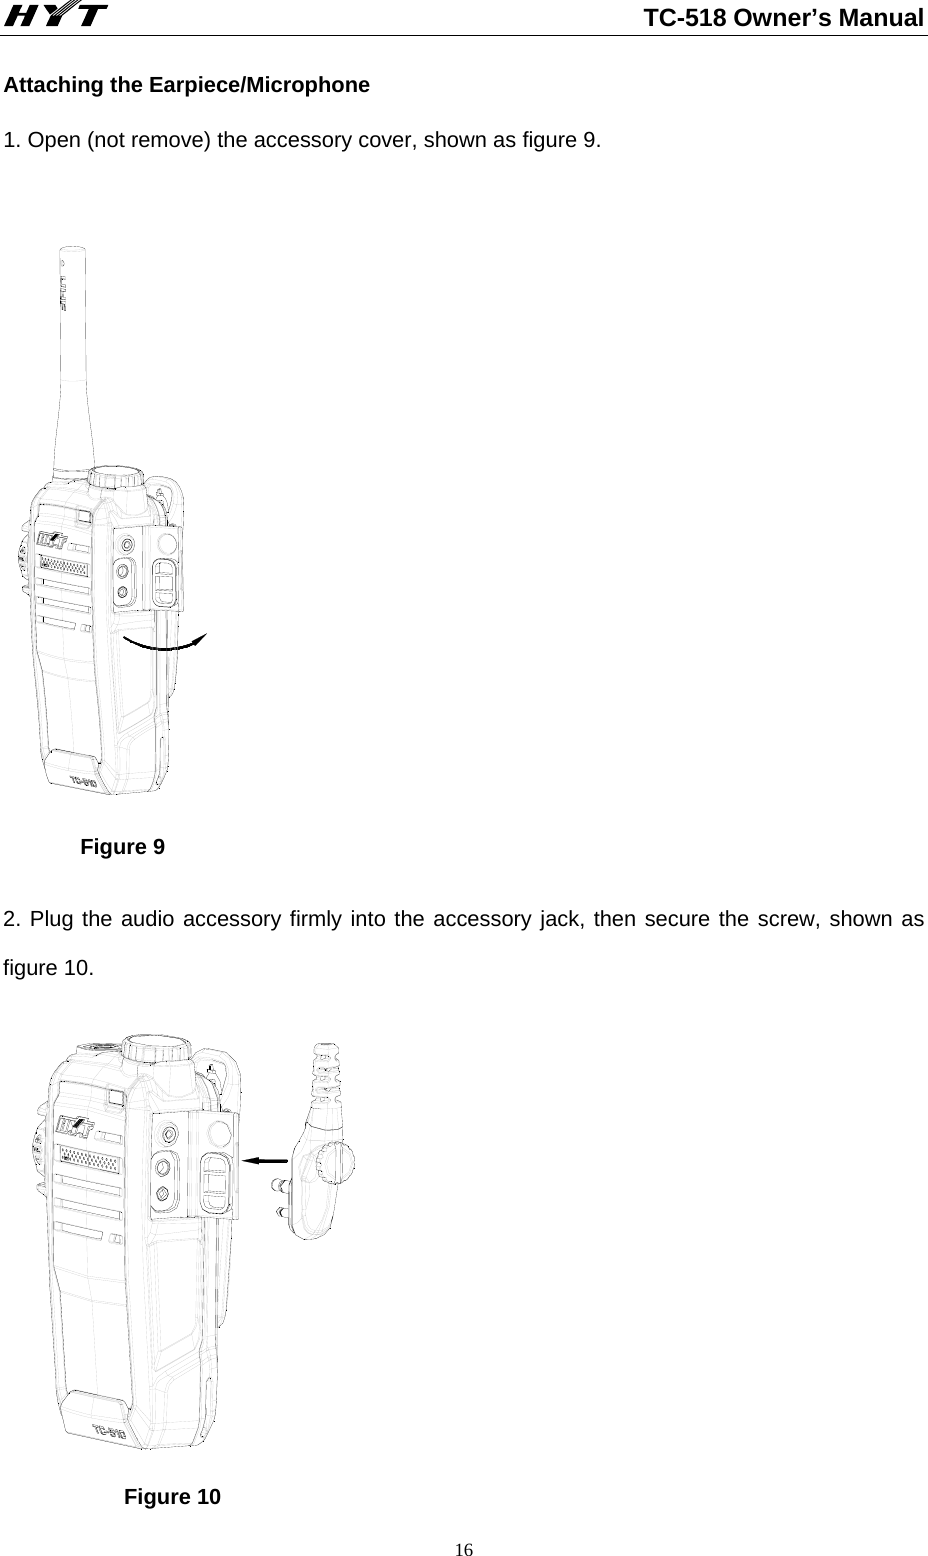                                                          TC-518 Owner’s Manual  16Attaching the Earpiece/Microphone   1. Open (not remove) the accessory cover, shown as figure 9.            Figure 9  2. Plug the audio accessory firmly into the accessory jack, then secure the screw, shown as figure 10.               Figure 10 